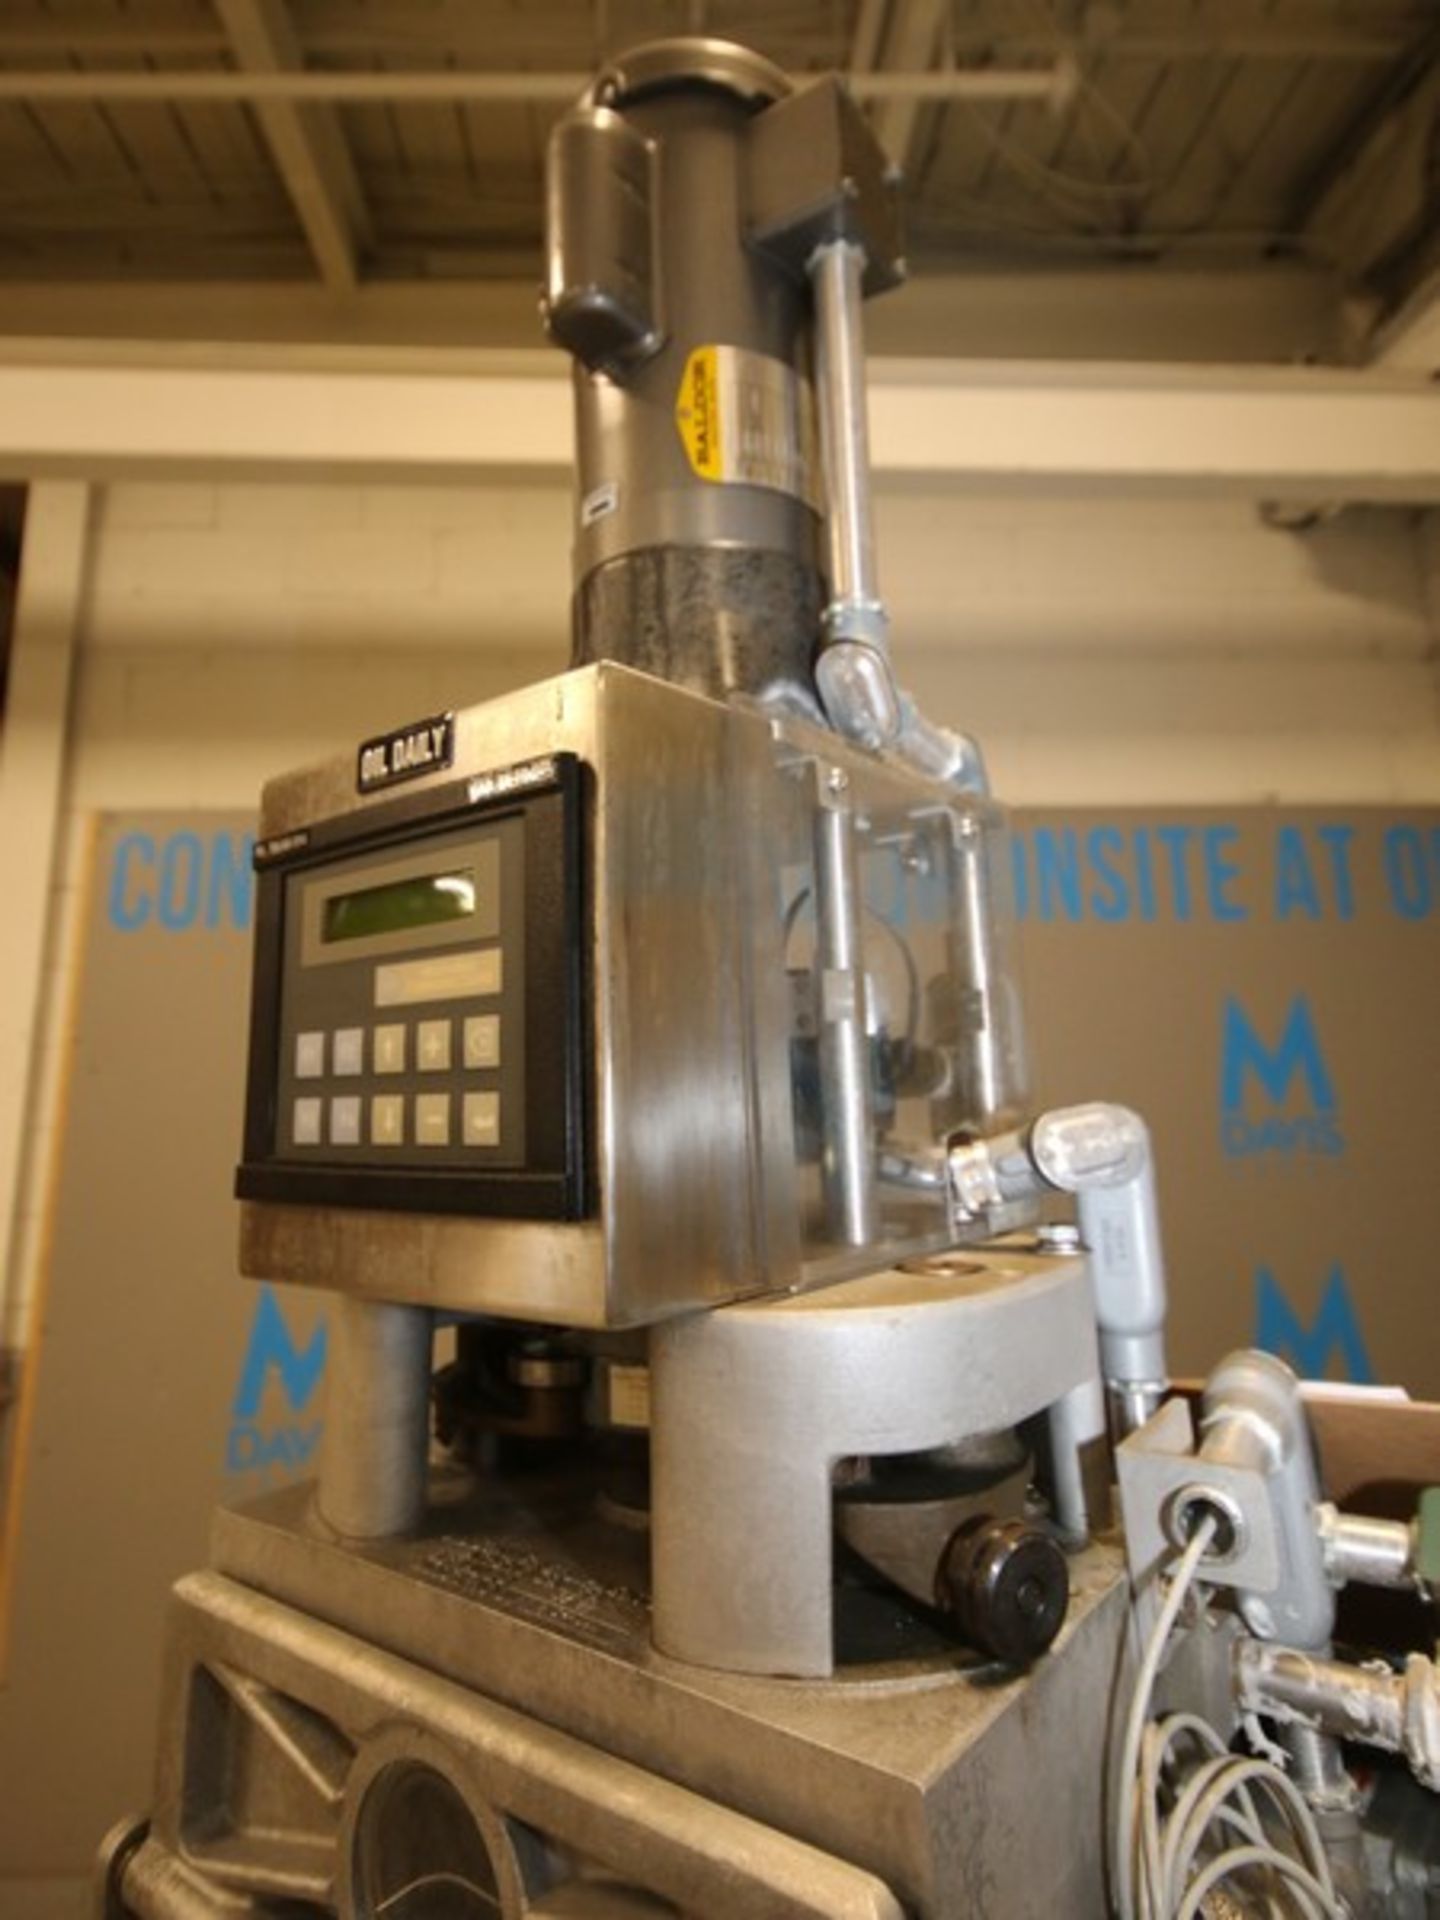 Dixie Double Can Seamer, Model UVGMD-ALCC, SN 95166, Busch On Board Vacuum Pump, 110/115V, Idec - Image 5 of 14